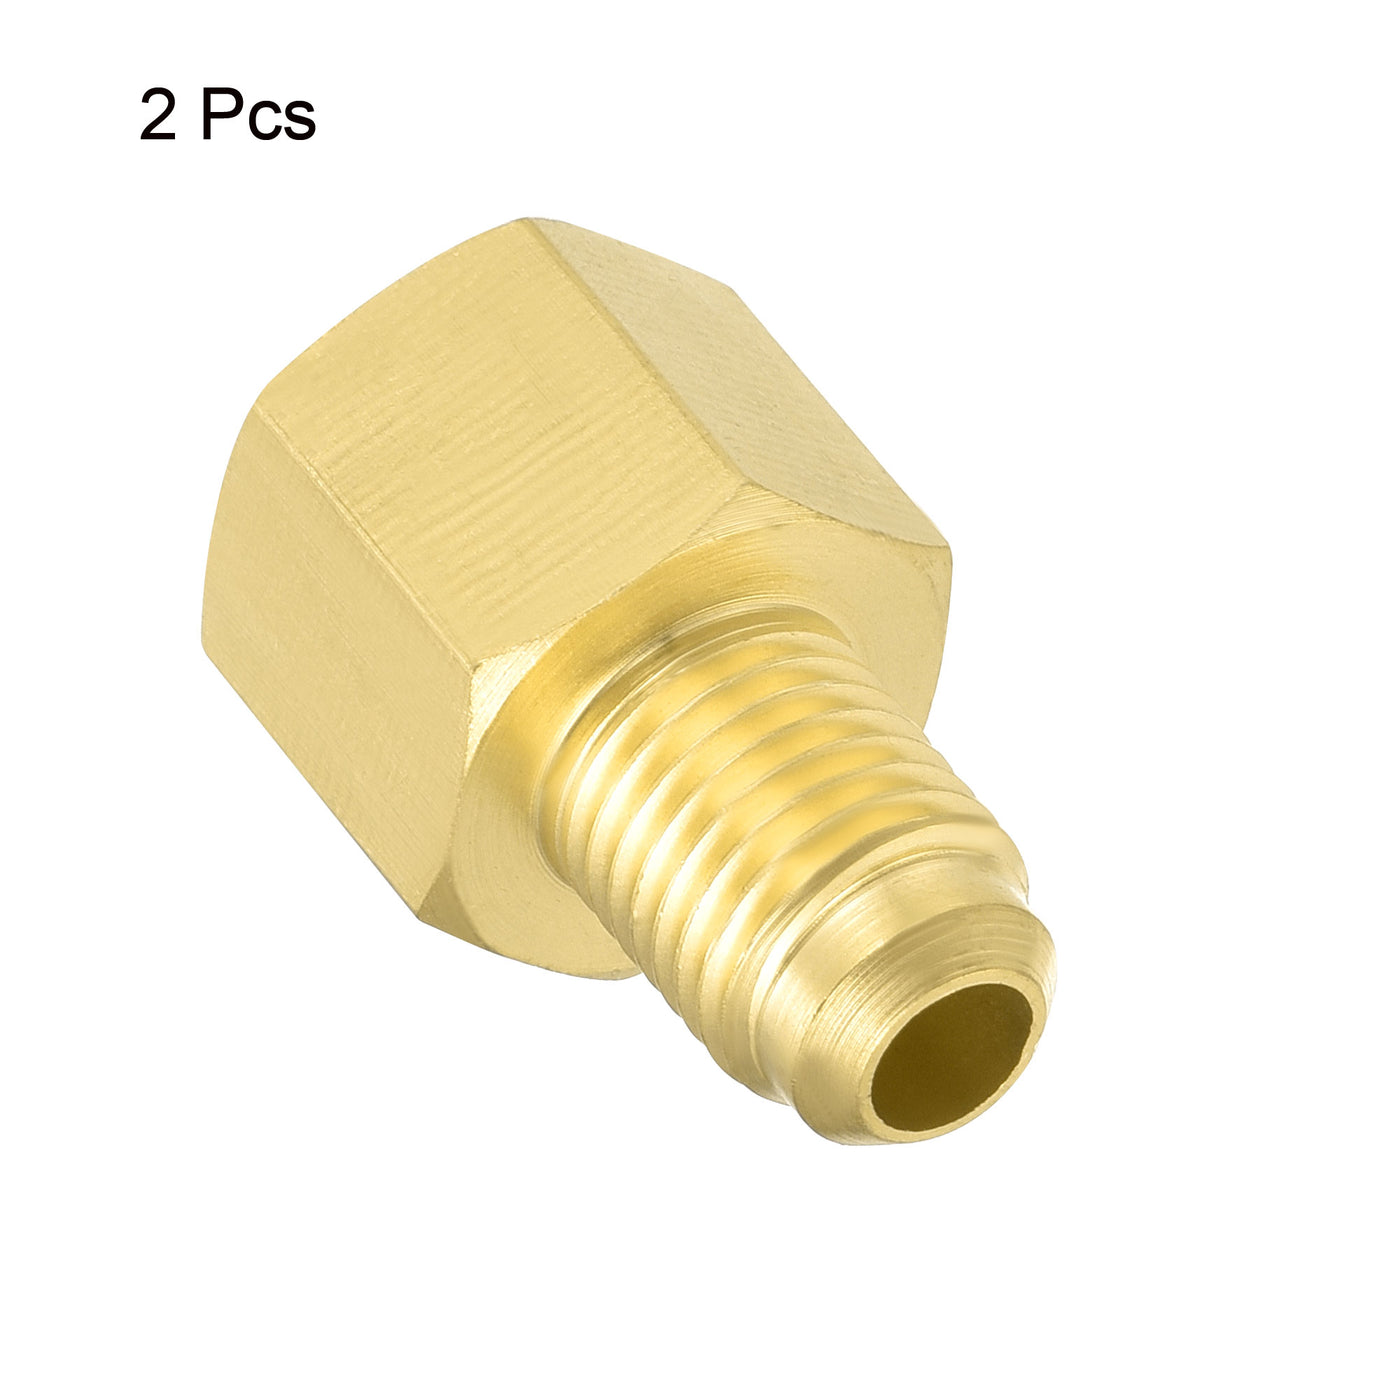 Harfington Brass Straight Fitting 1/4SAE Male to 1/2ACME Female Thread Reducing Pipe Fittings Adapter, Pack of 2